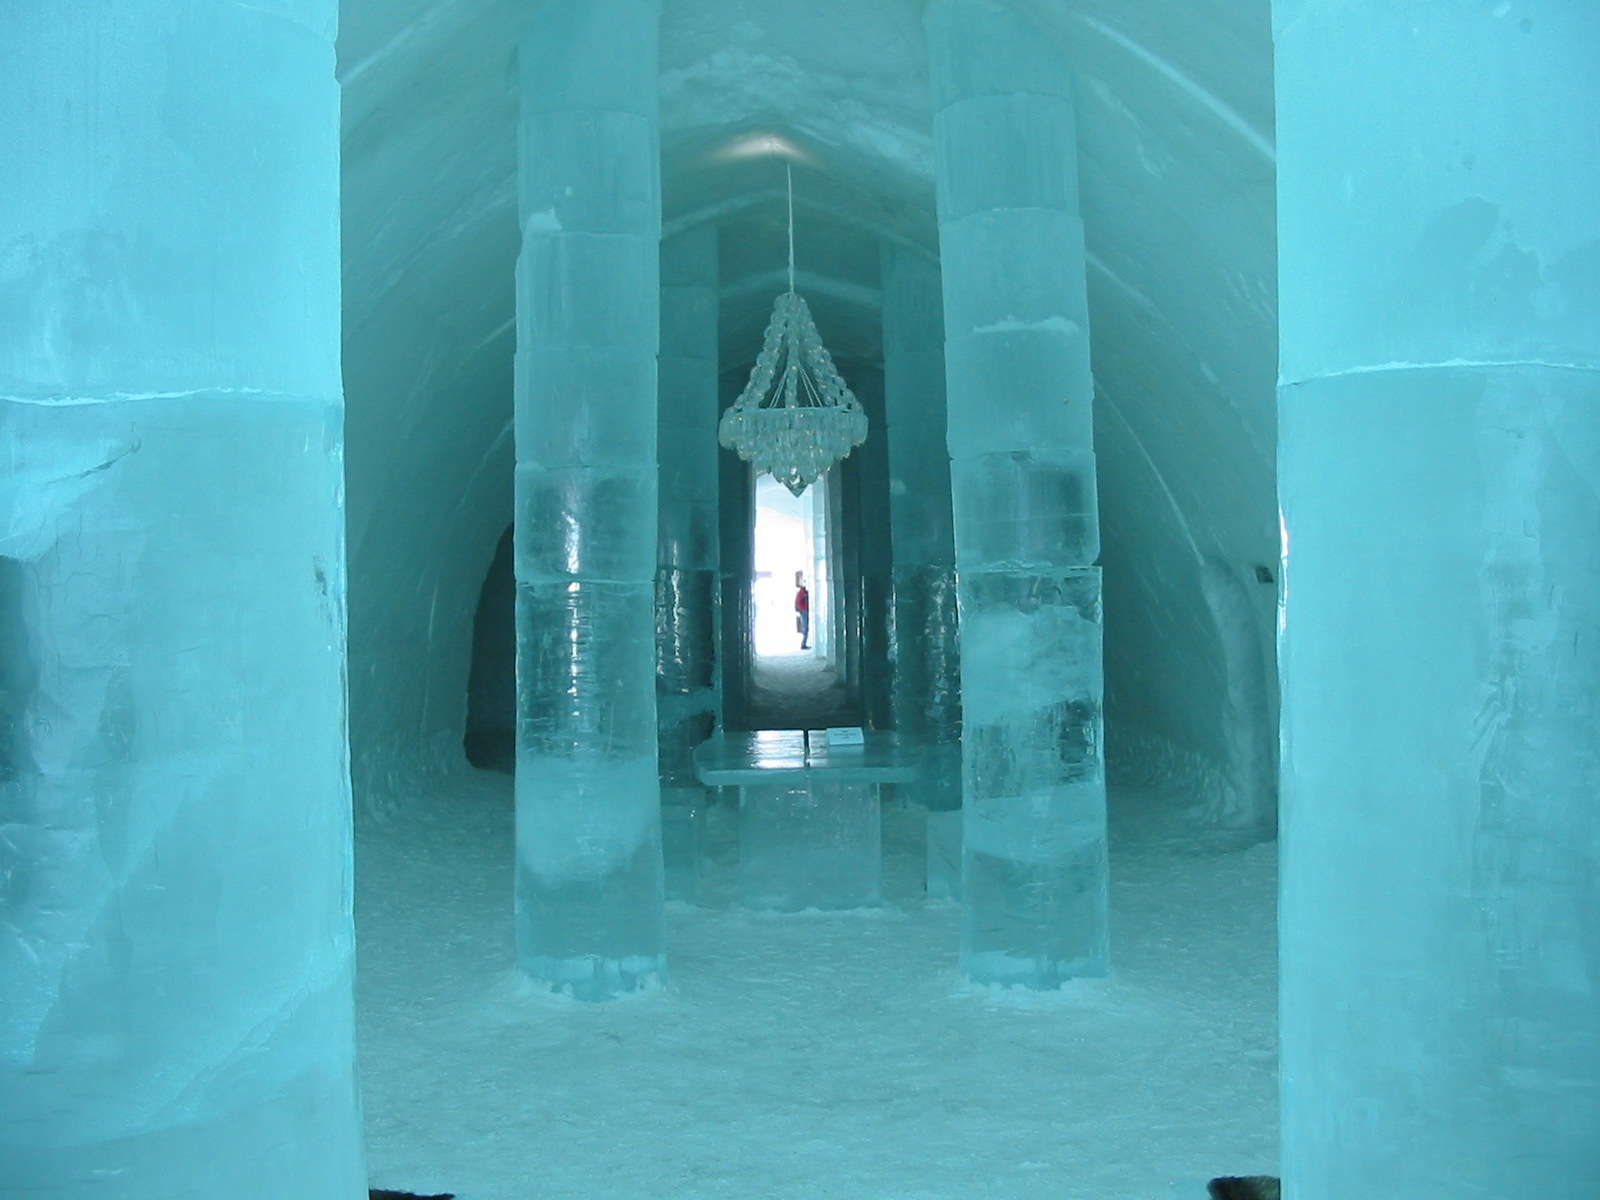 The beauty of ICEHOTEL is that it is never the same place twice. Sculpted from ice gathered from the nearby Torne River, ICEHOTEL offers a combination of warm and cold accommodations. This ever-changing work of art is a breathtakingly romantic spot for couples who can stand the freezing temperatures.